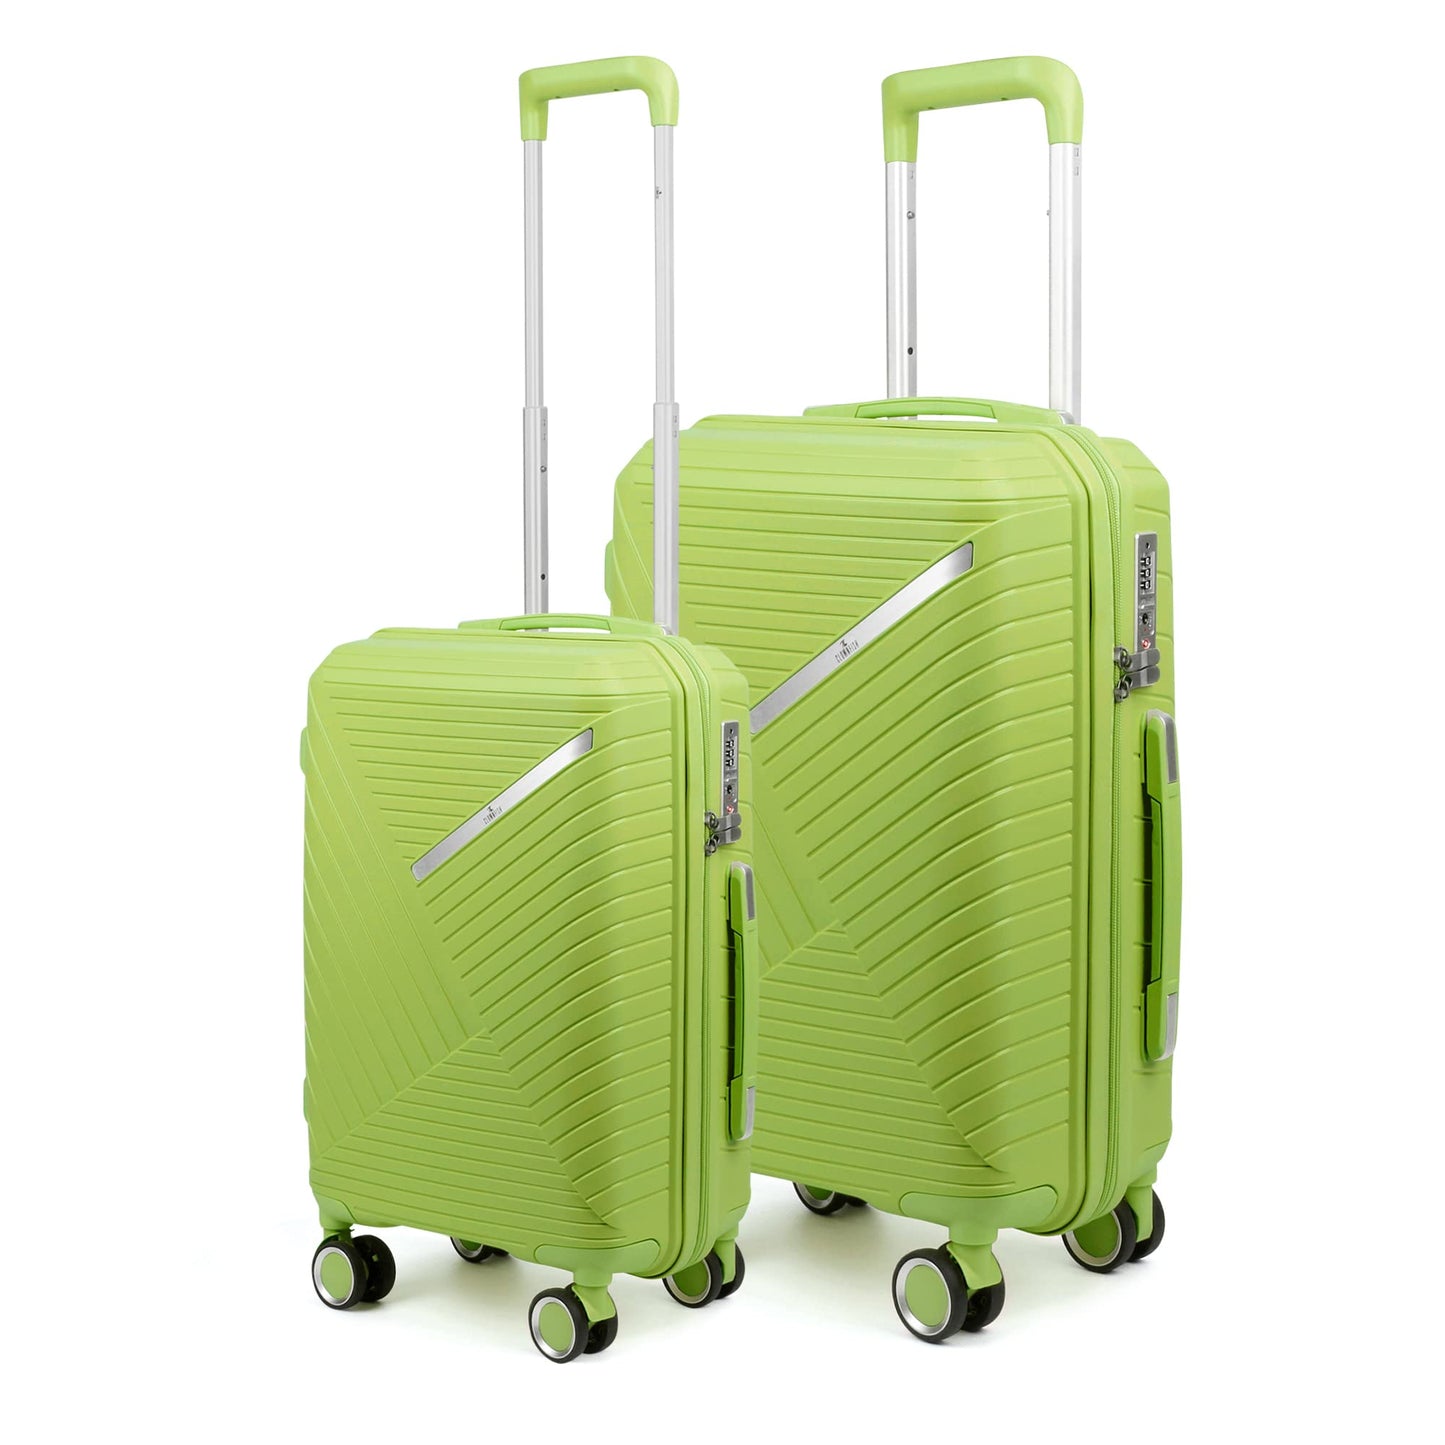 THE CLOWNFISH Combo of 2 Denzel Series Luggage Polypropylene Hard Case Suitcases Eight Wheel Trolley Bags with TSA Lock- Green Medium 66 cm-26 inch Small 56 cm-22 inch